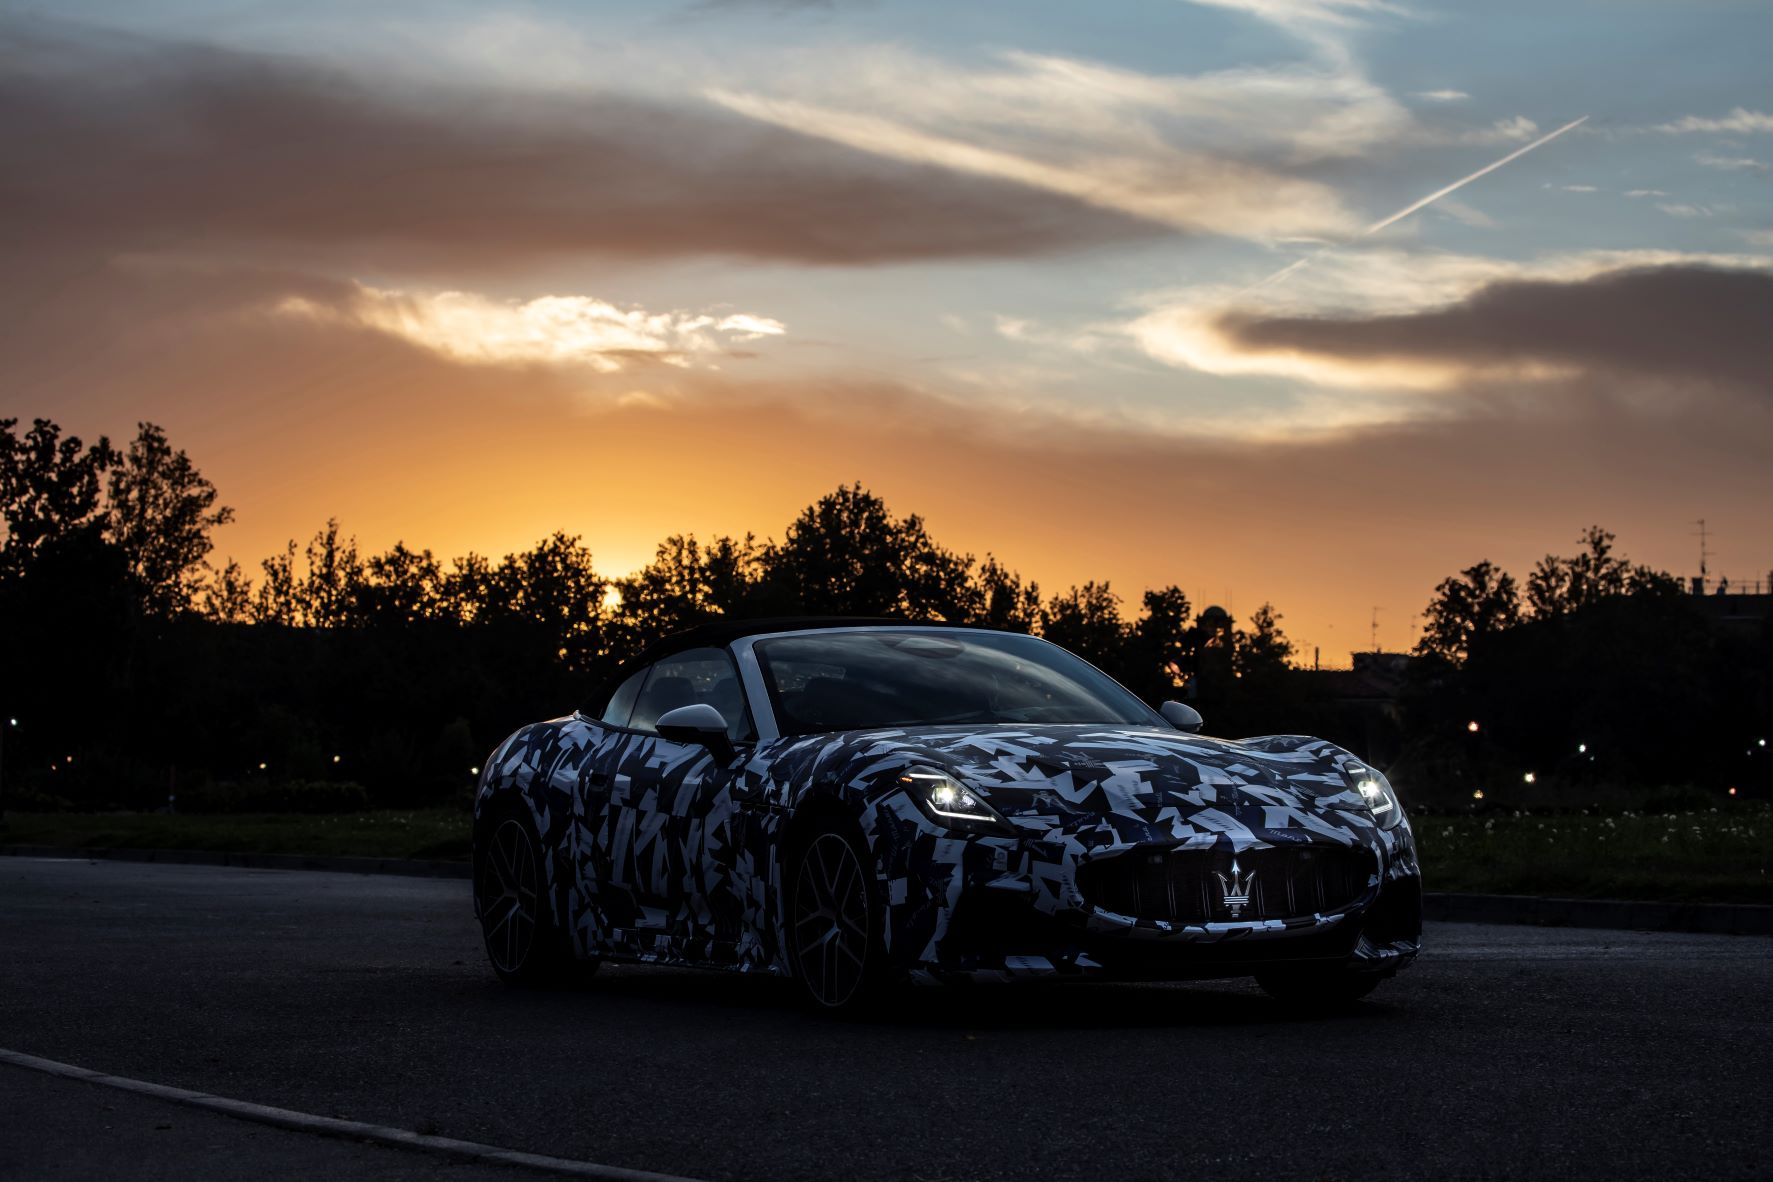 Front three quarters view of the new Maserati GranCabrio prototype at sunset